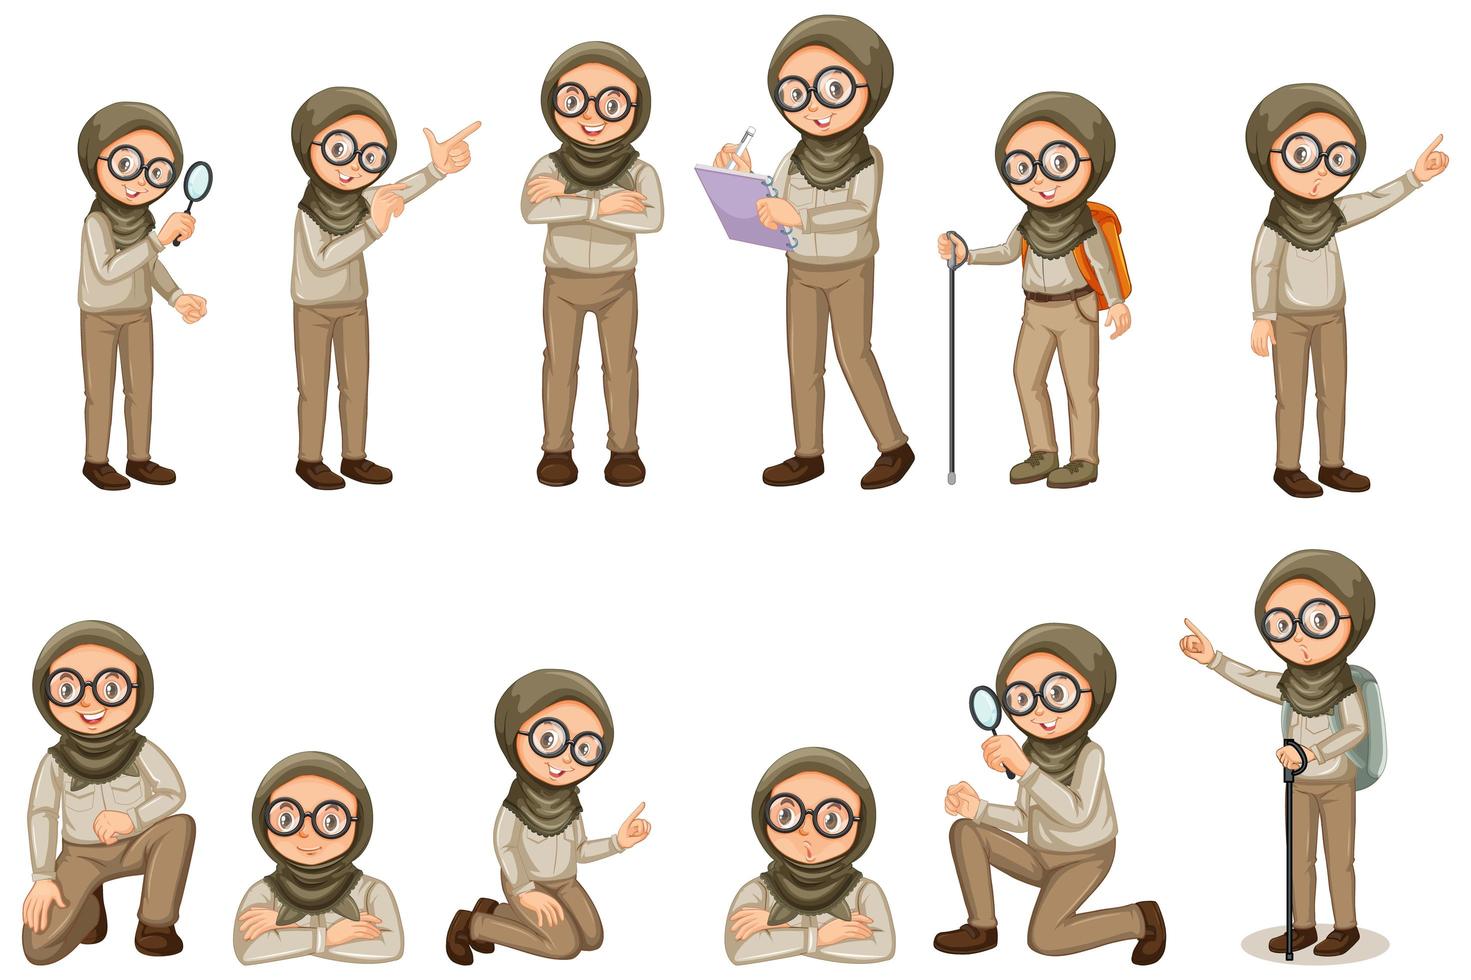 Muslim girl in scout uniform doing different poses on white background vector